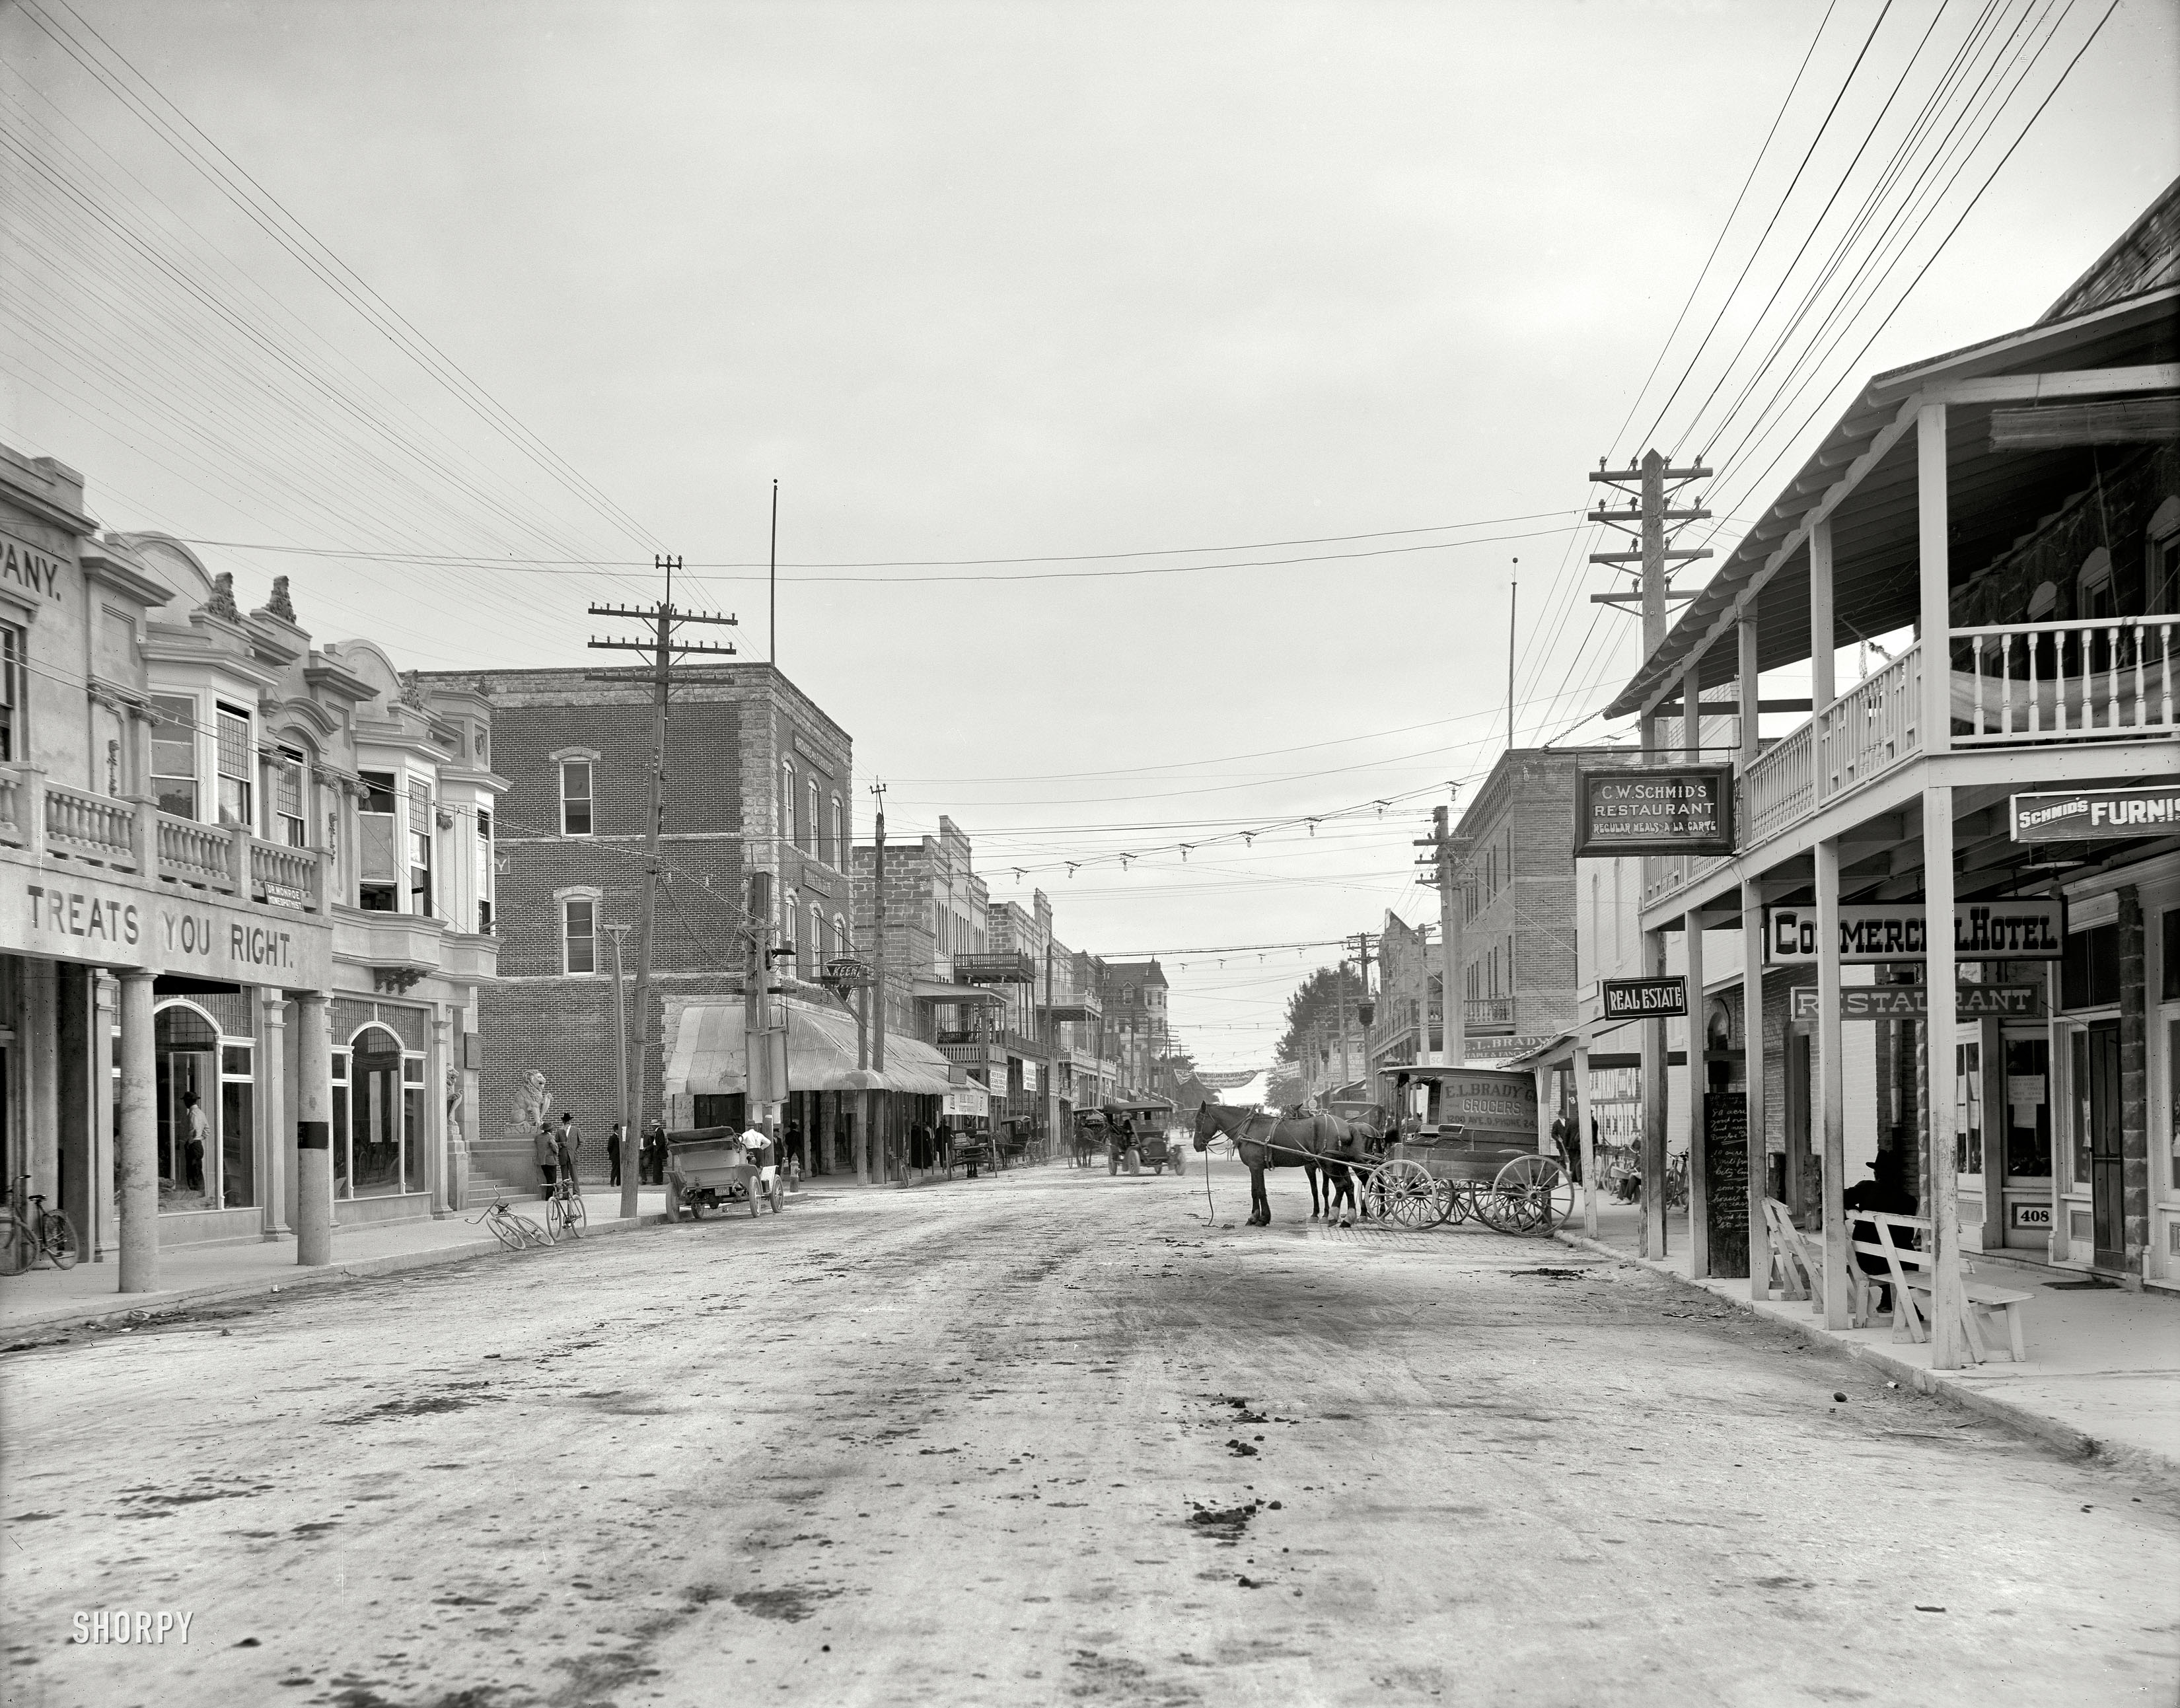 Circa 1908. Who would care to hazard a guess as to the location of this bustling metropolis? Extra points for Street View. Detroit Publishing Co. View full size.

UPDATE: The guesses as to the location of "Anytown, USA" (this post's original title) were, quite literally, all over the map -- from Deadwood to Buffalo to Whitehouse, Ohio. Many incorrect guesses for Titusville, Florida. The correct answer, and original caption: "12th Street, looking east, Miami, Florida." 